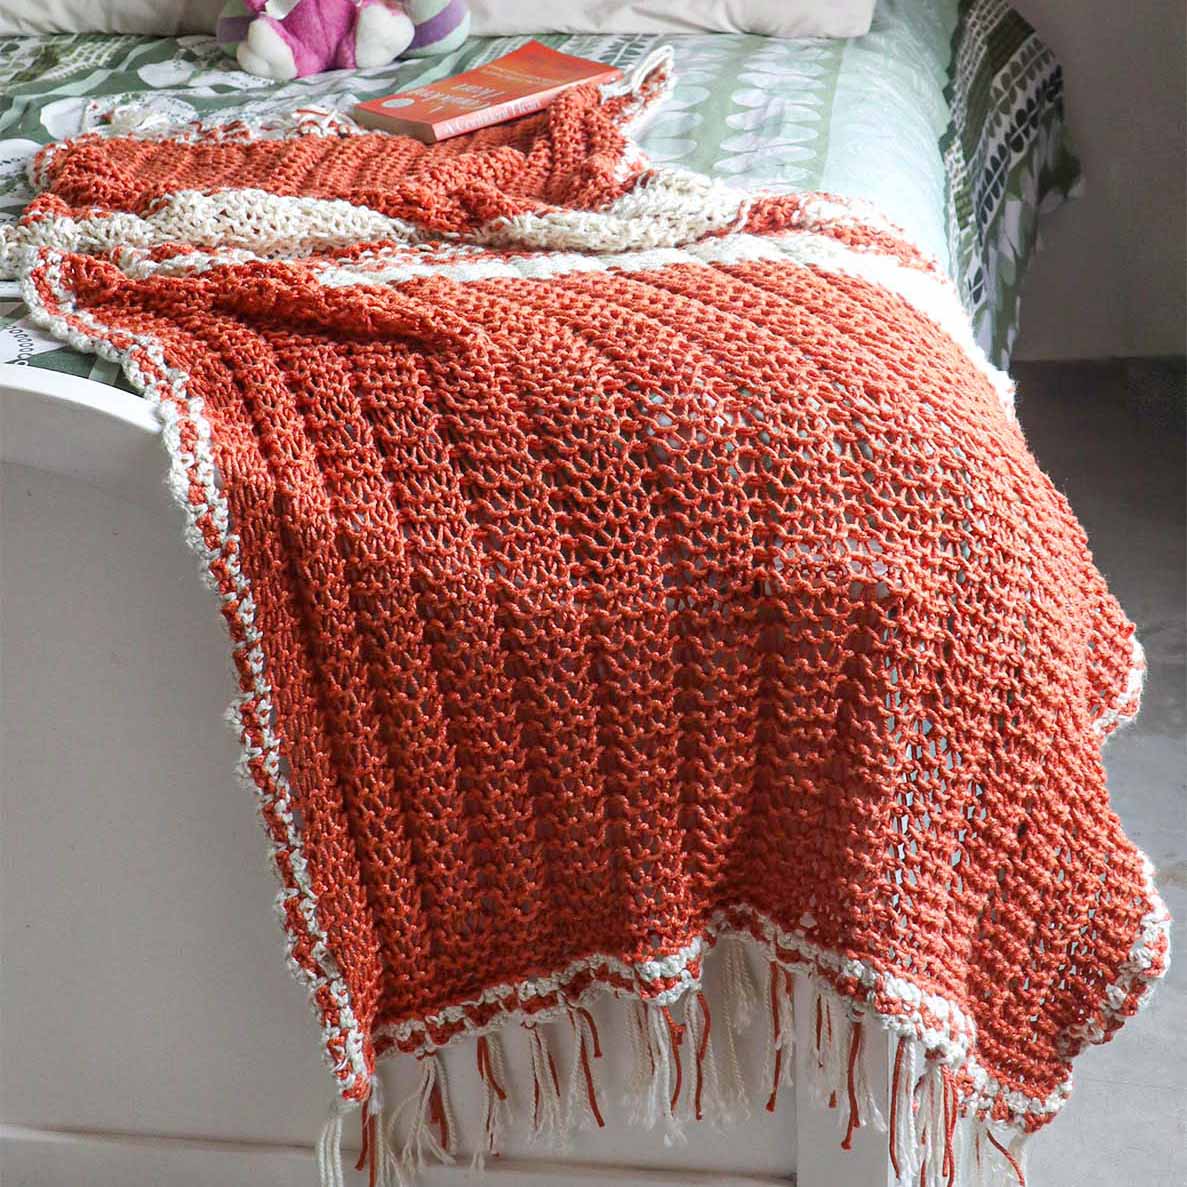 This is a Summer Blanket For Babies and Adults To Use During Hot Weathers and also during winters - Donwload the Knitting Pattern Today from Muezart India